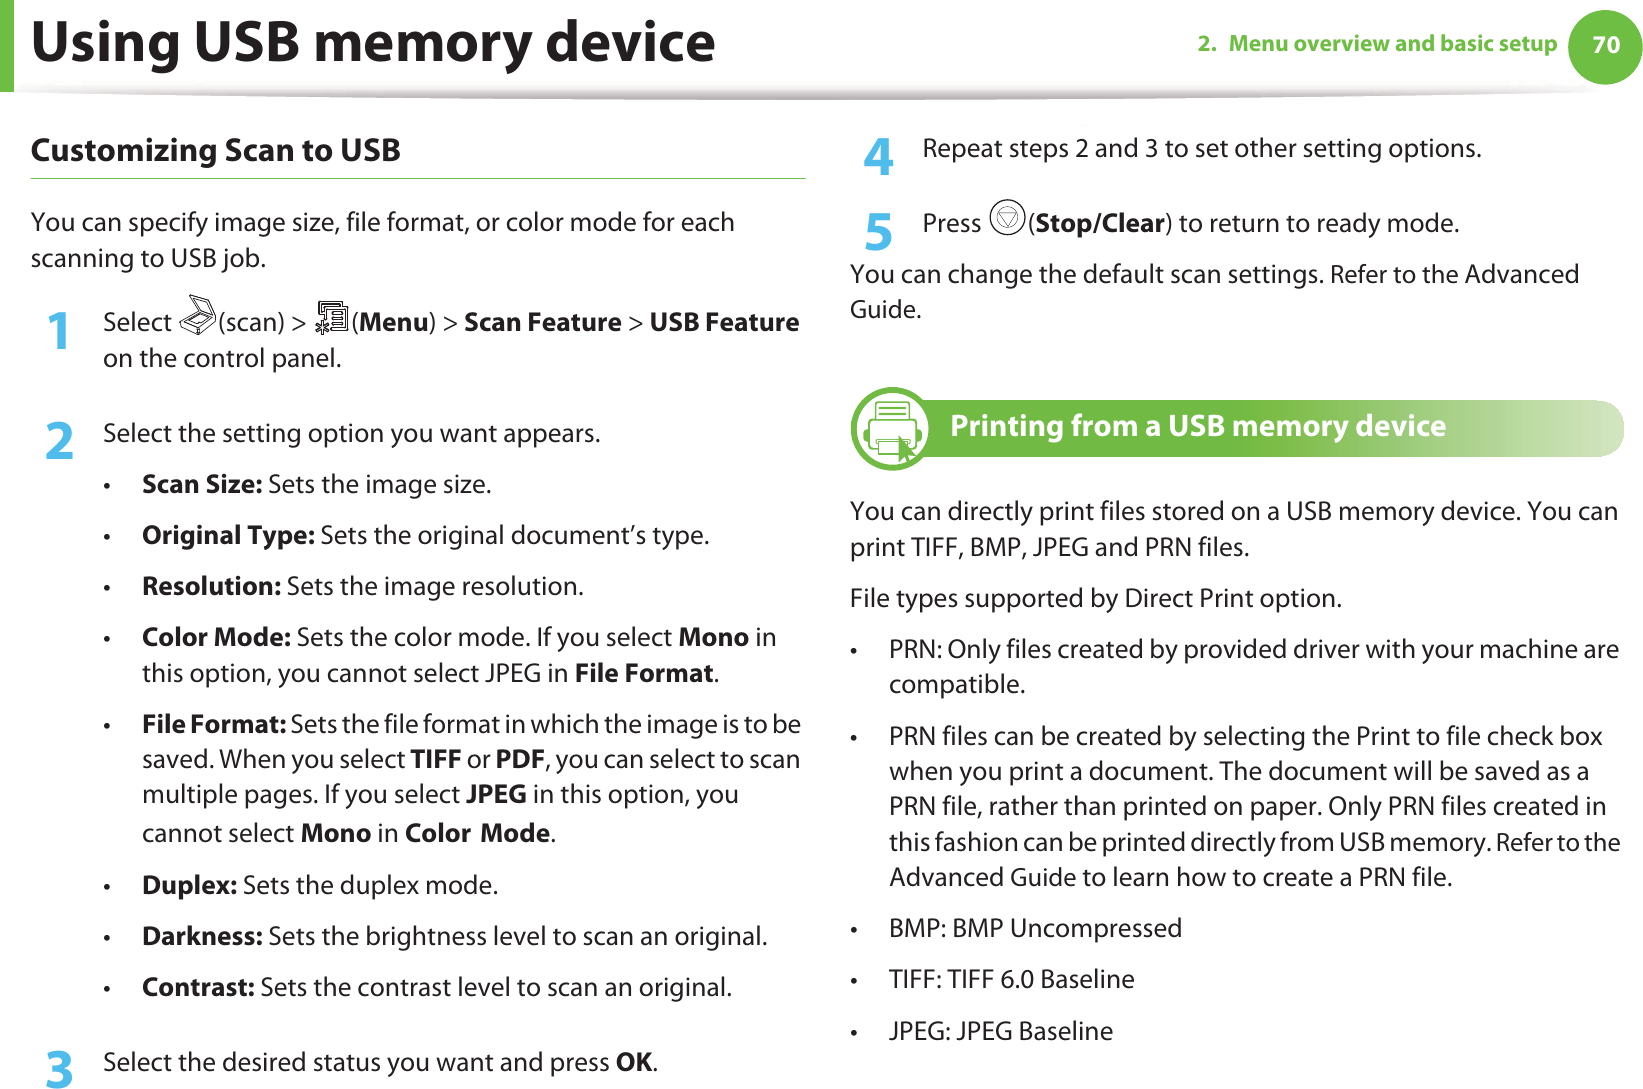 Using USB memory device 702. Menu overview and basic setupCustomizing Scan to USB You can specify image size, file format, or color mode for each scanning to USB job.1Select (scan) &gt; (Menu) &gt; Scan Feature &gt; USB Feature on the control panel.2  Select the setting option you want appears.•Scan Size: Sets the image size.•Original Type: Sets the original document’s type.•Resolution: Sets the image resolution.•Color Mode: Sets the color mode. If you select Mono in this option, you cannot select JPEG in File Format.•File Format: Sets the file format in which the image is to be saved. When you select TIFF or PDF, you can select to scan multiple pages. If you select JPEG in this option, you cannot select Mono in ColorGMode.•Duplex: Sets the duplex mode.•Darkness: Sets the brightness level to scan an original.•Contrast: Sets the contrast level to scan an original.3  Select the desired status you want and press OK.4  Repeat steps 2 and 3 to set other setting options.5  Press (Stop/Clear) to return to ready mode.You can change the default scan settings. Refer to the Advanced Guide.25 Printing from a USB memory deviceYou can directly print files stored on a USB memory device. You can print TIFF, BMP, JPEG and PRN files.File types supported by Direct Print option.• PRN: Only files created by provided driver with your machine are compatible. • PRN files can be created by selecting the Print to file check box when you print a document. The document will be saved as a PRN file, rather than printed on paper. Only PRN files created in this fashion can be printed directly from USB memory. Refer to the Advanced Guide to learn how to create a PRN file.• BMP: BMP Uncompressed• TIFF: TIFF 6.0 Baseline•JPEG: JPEG Baseline